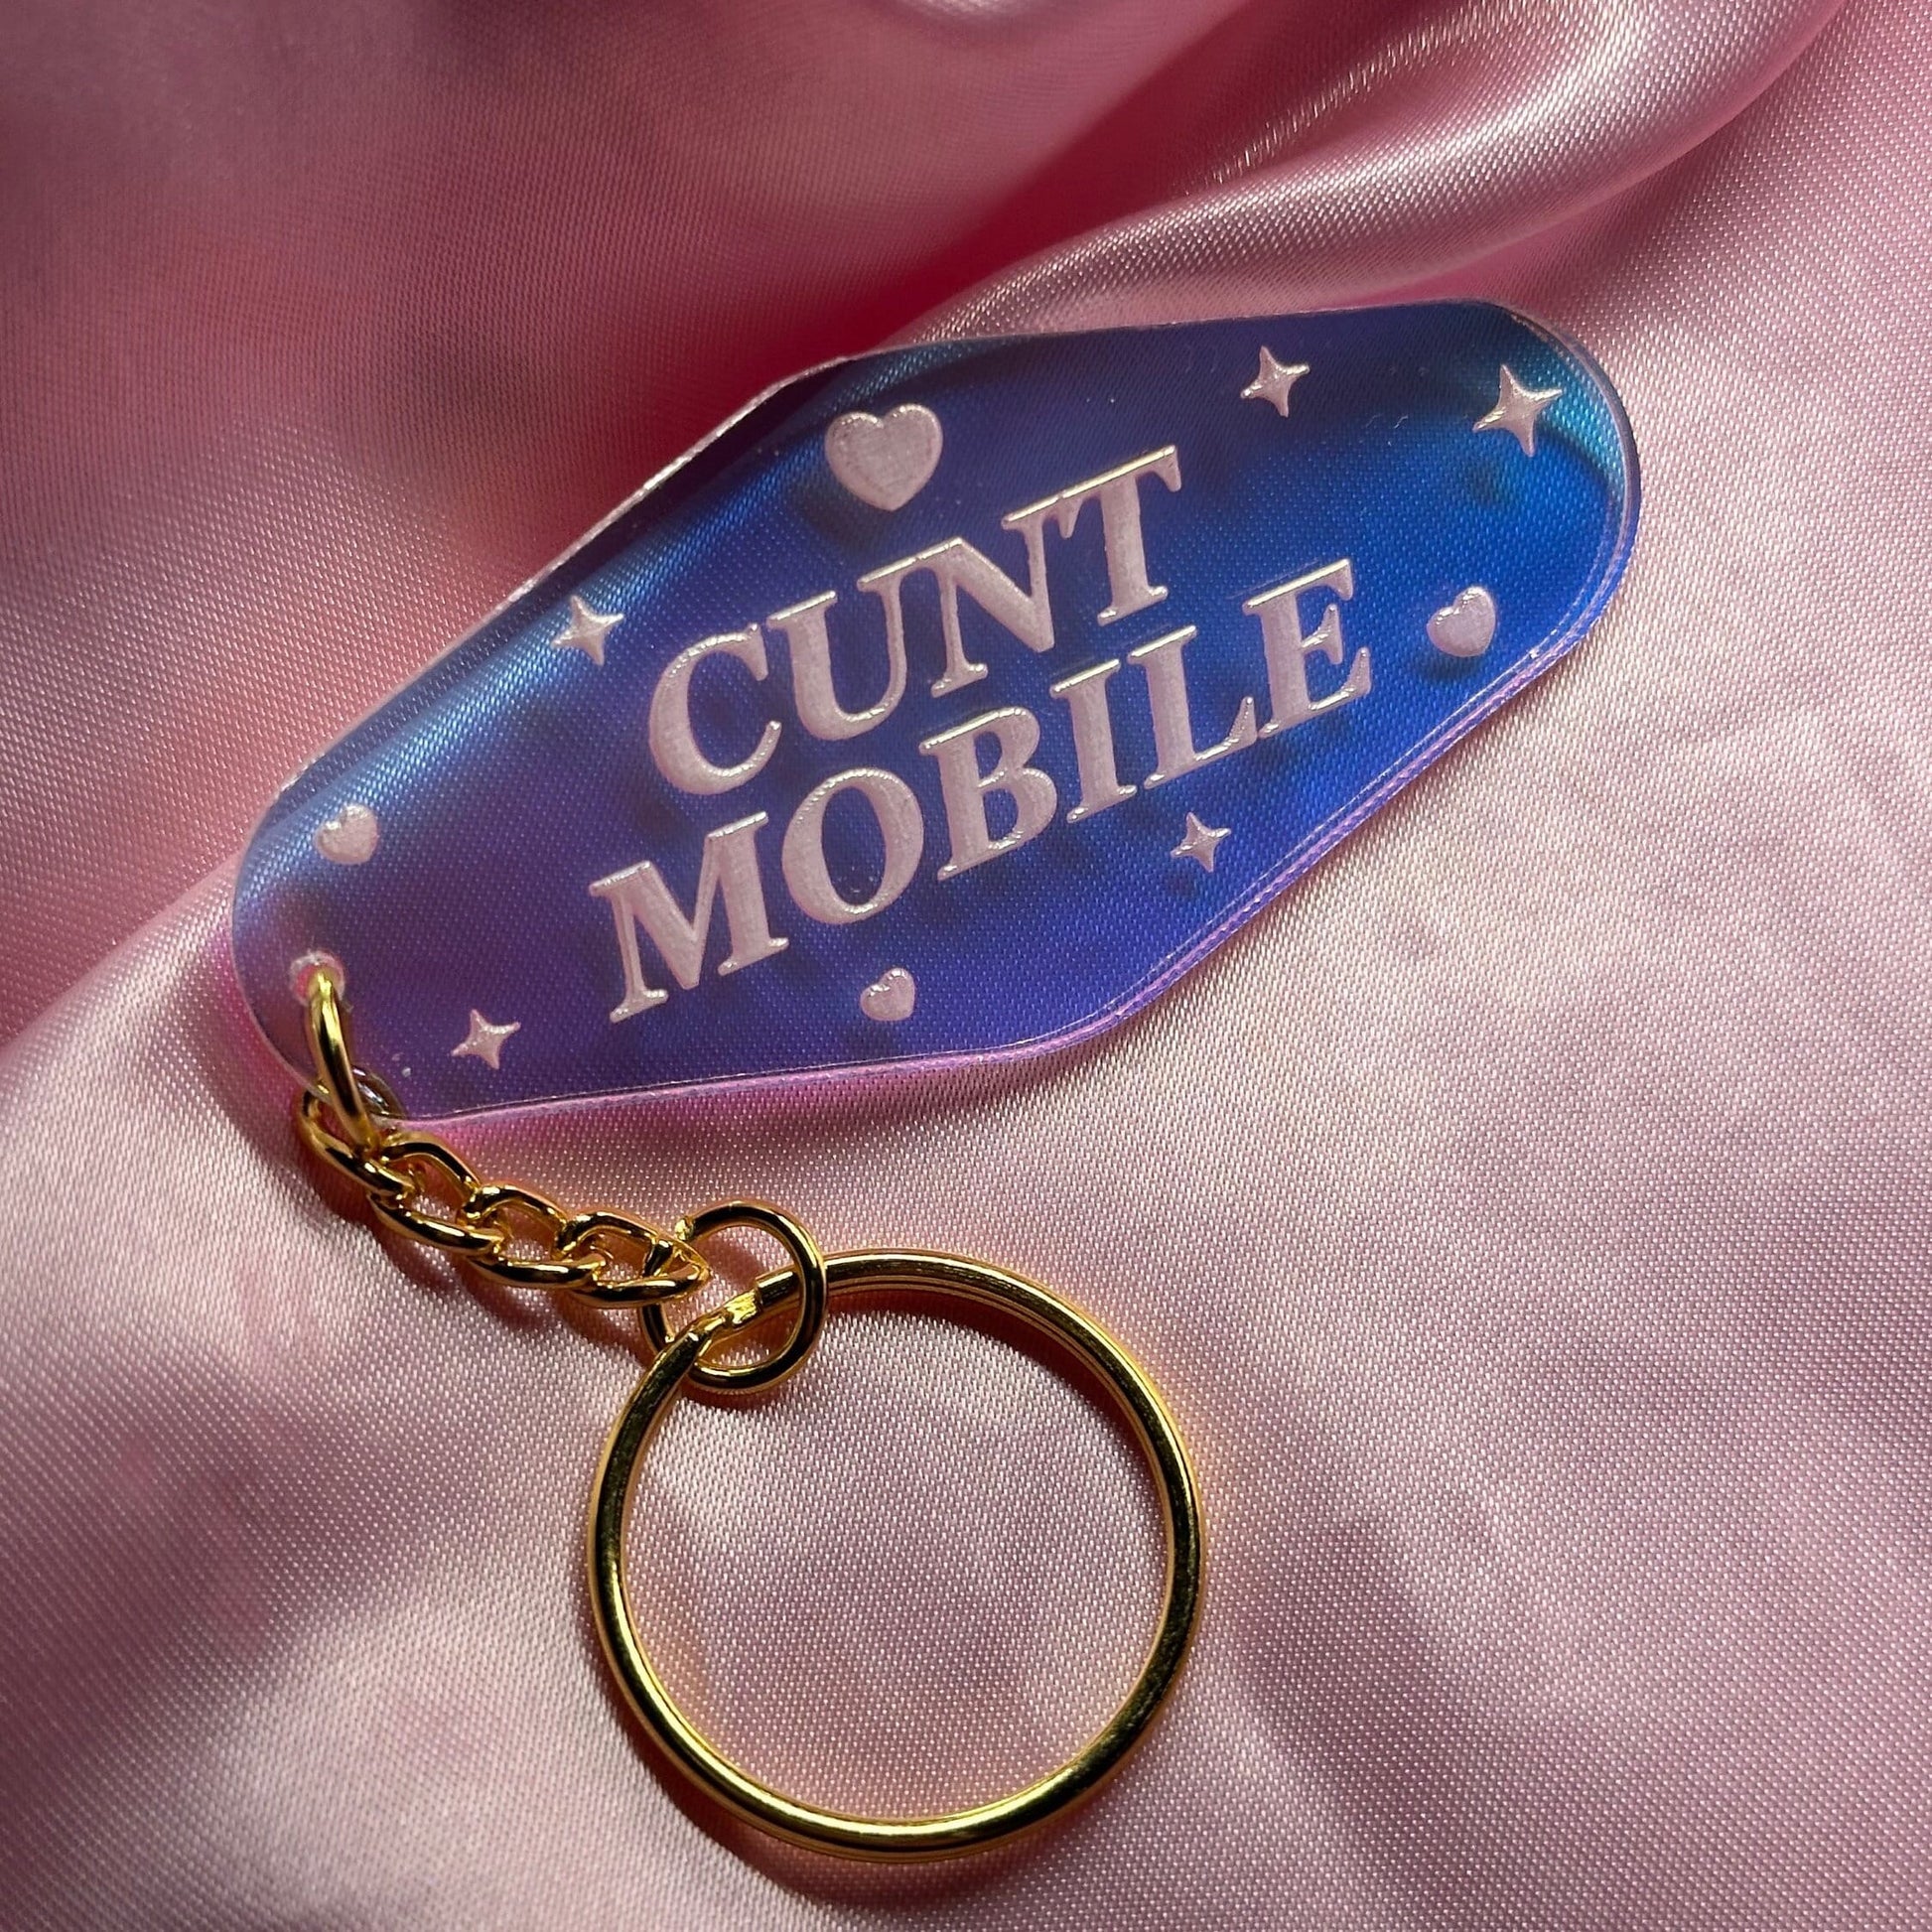 Cunt Mobile Iridescent Acrylic Motel Keychain